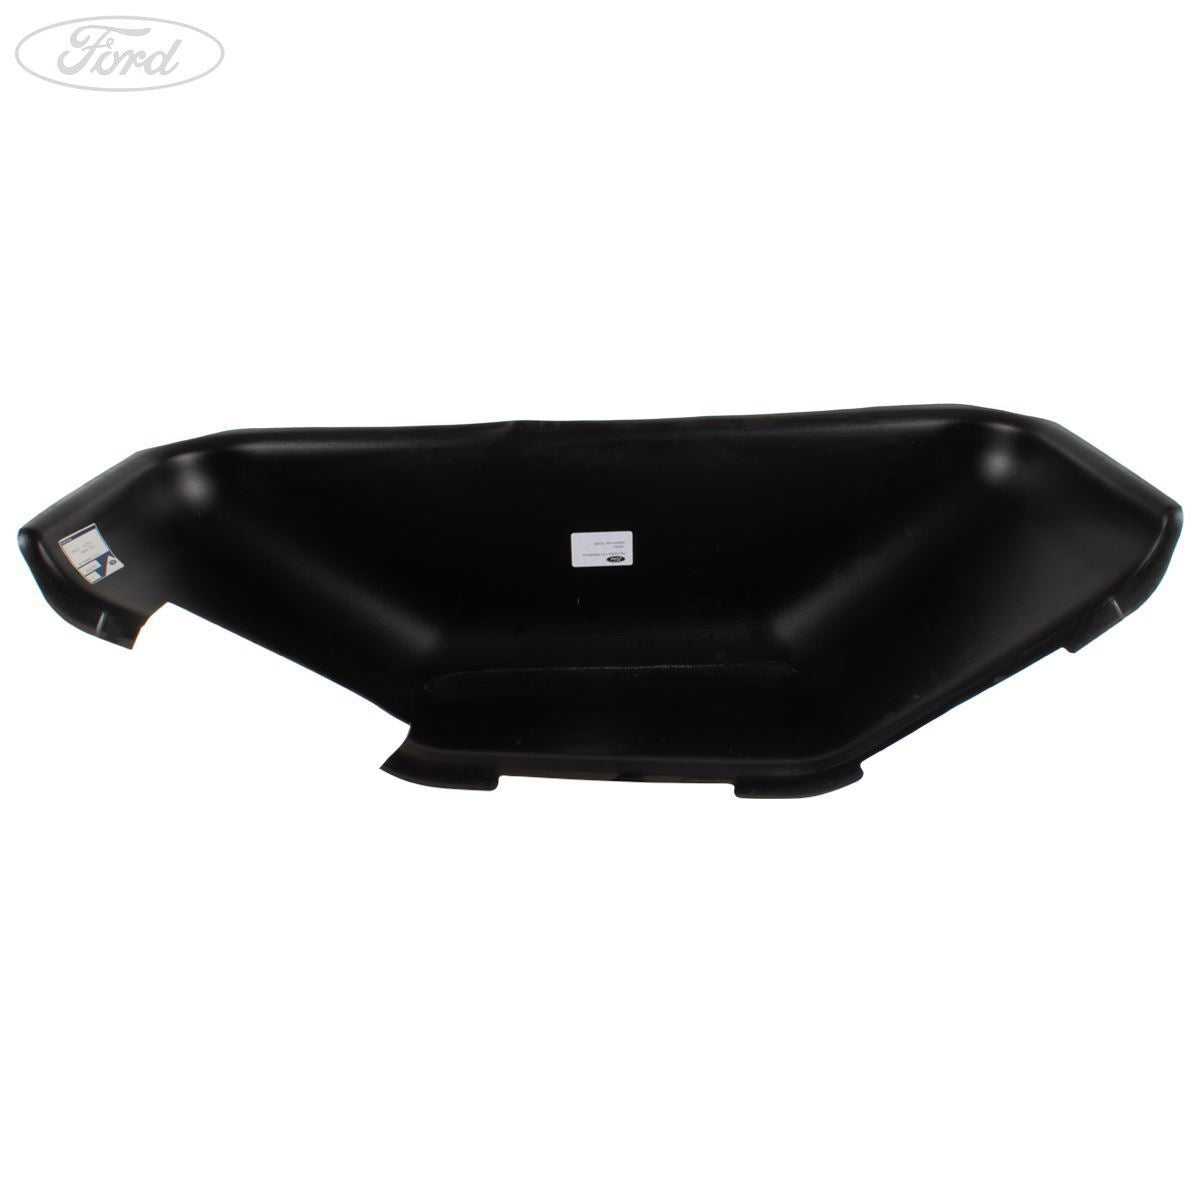 Ford, TRANSIT O/S REAR INNER WHEEL ARCH STONE PROTECTION